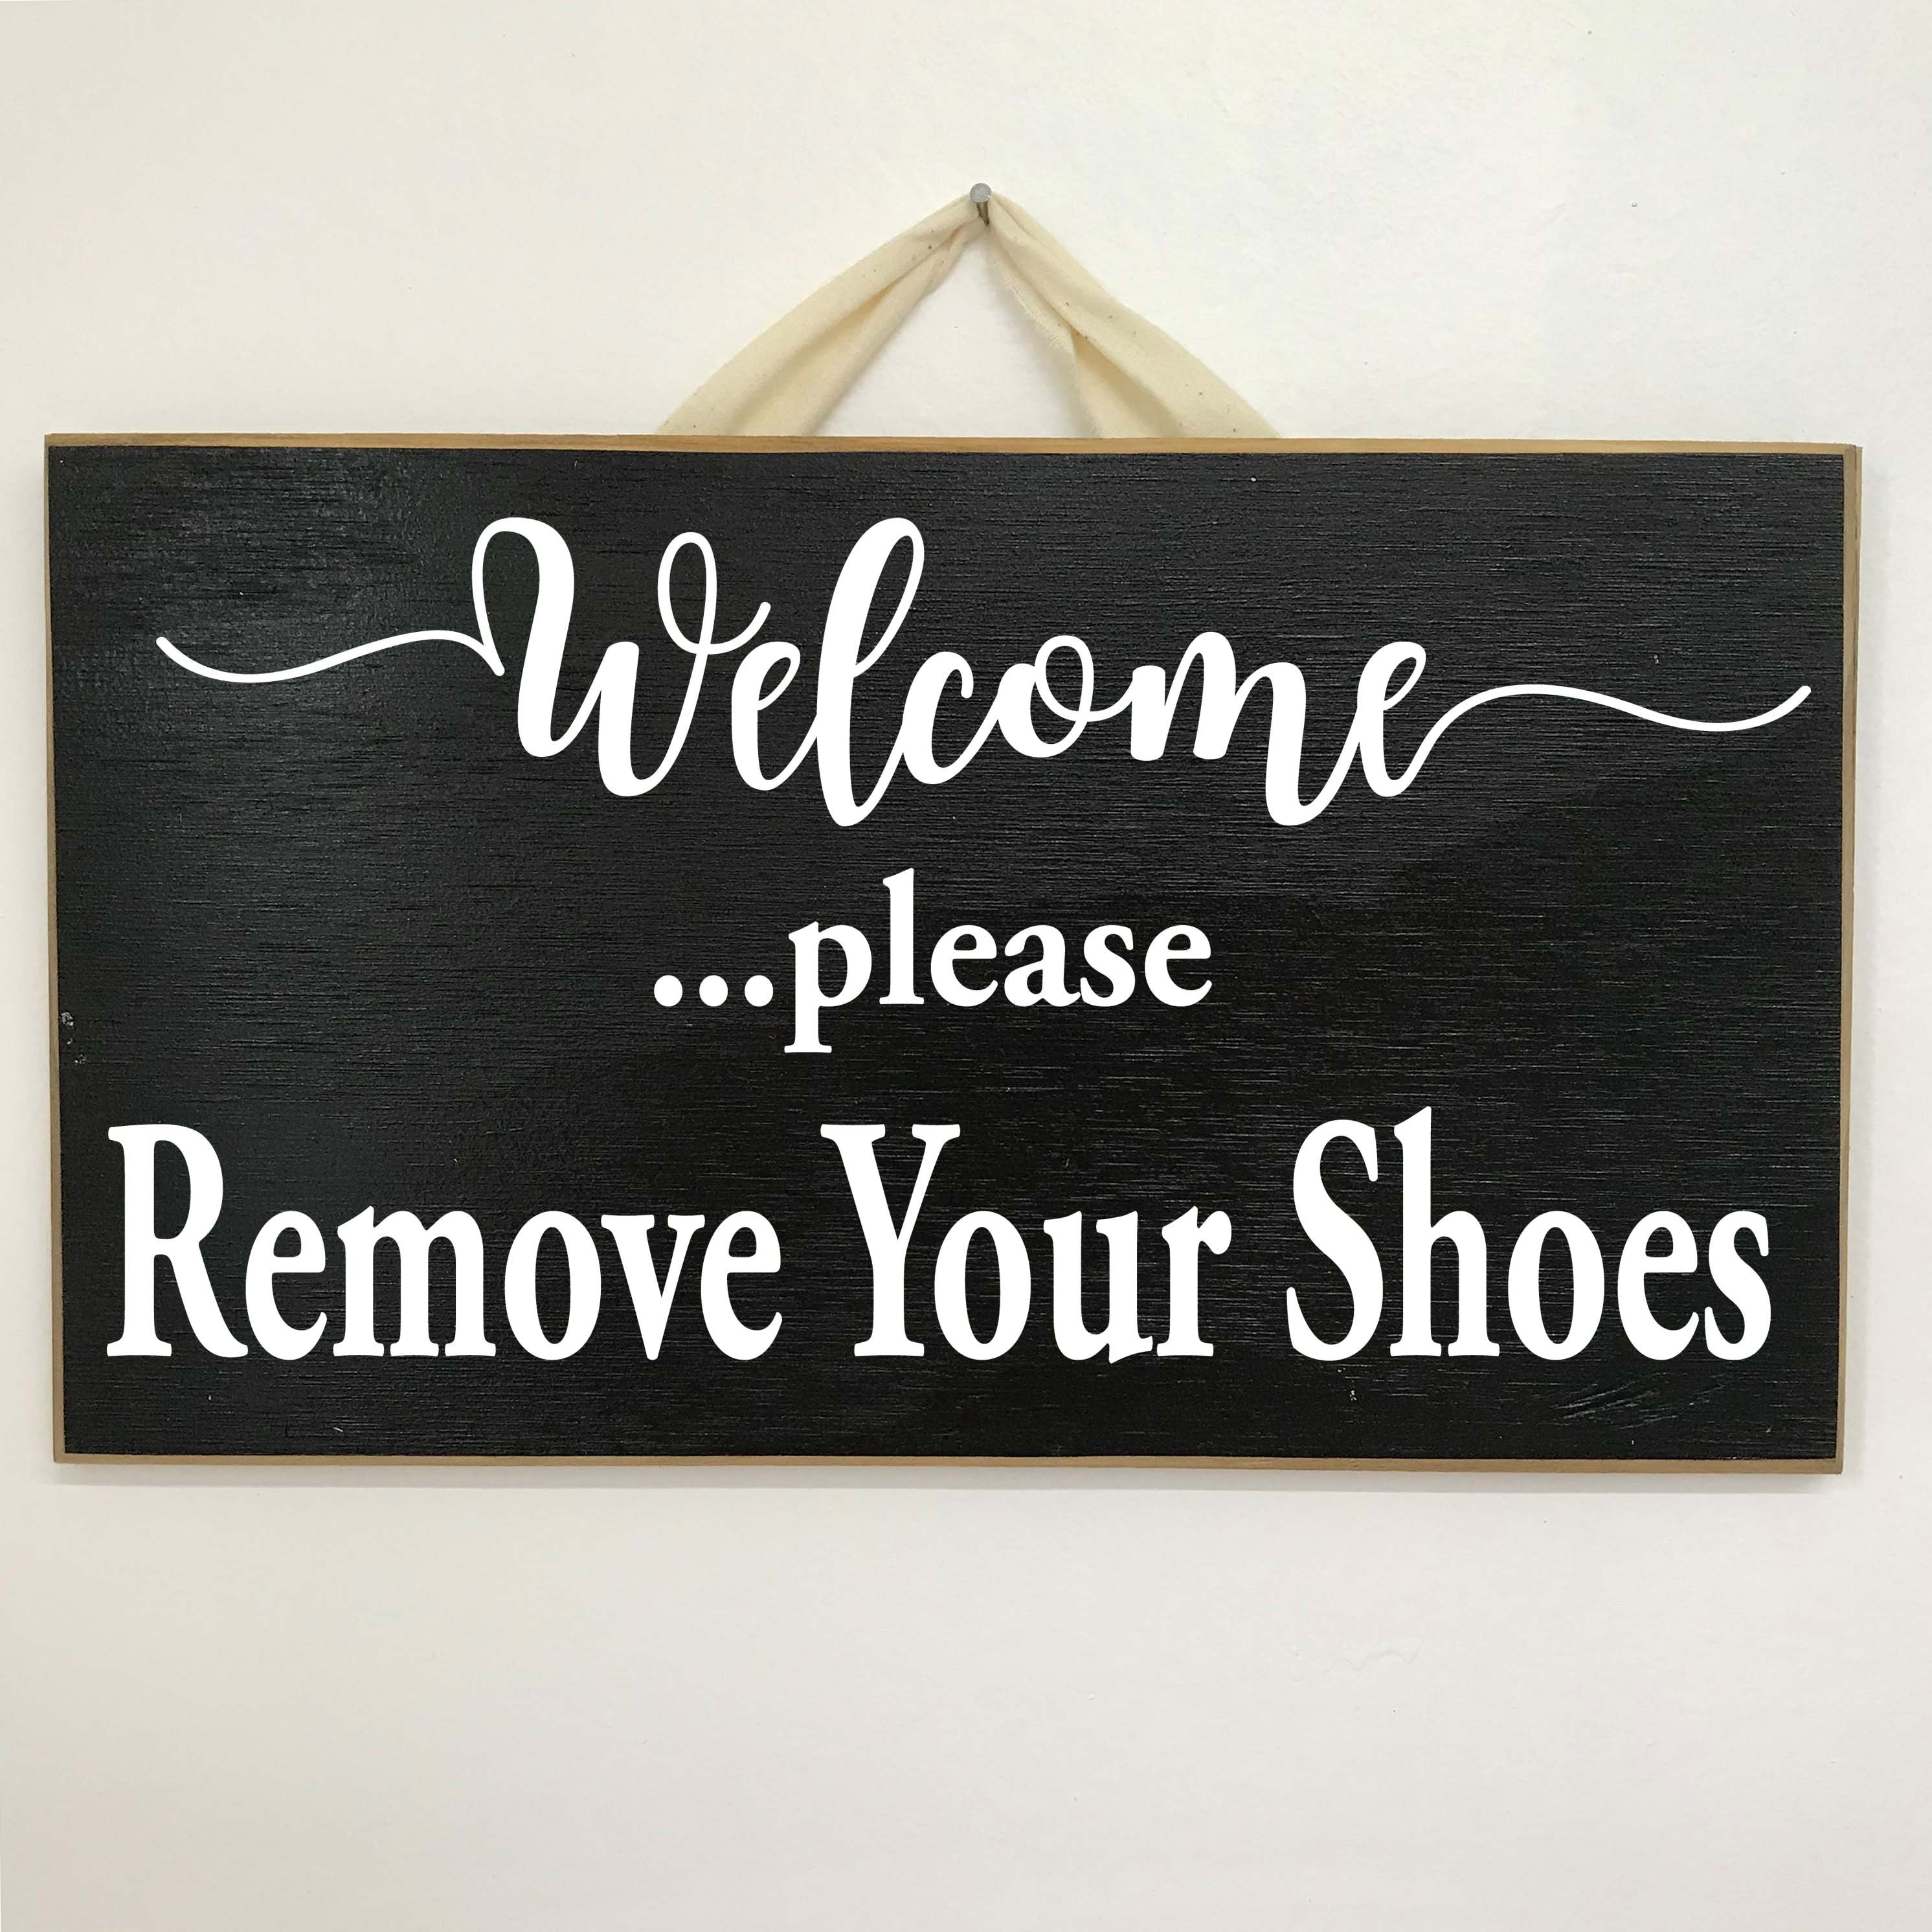 Welcome Please Remove Your Shoes Metal Sign Decorative Wall Hanging Plaque 